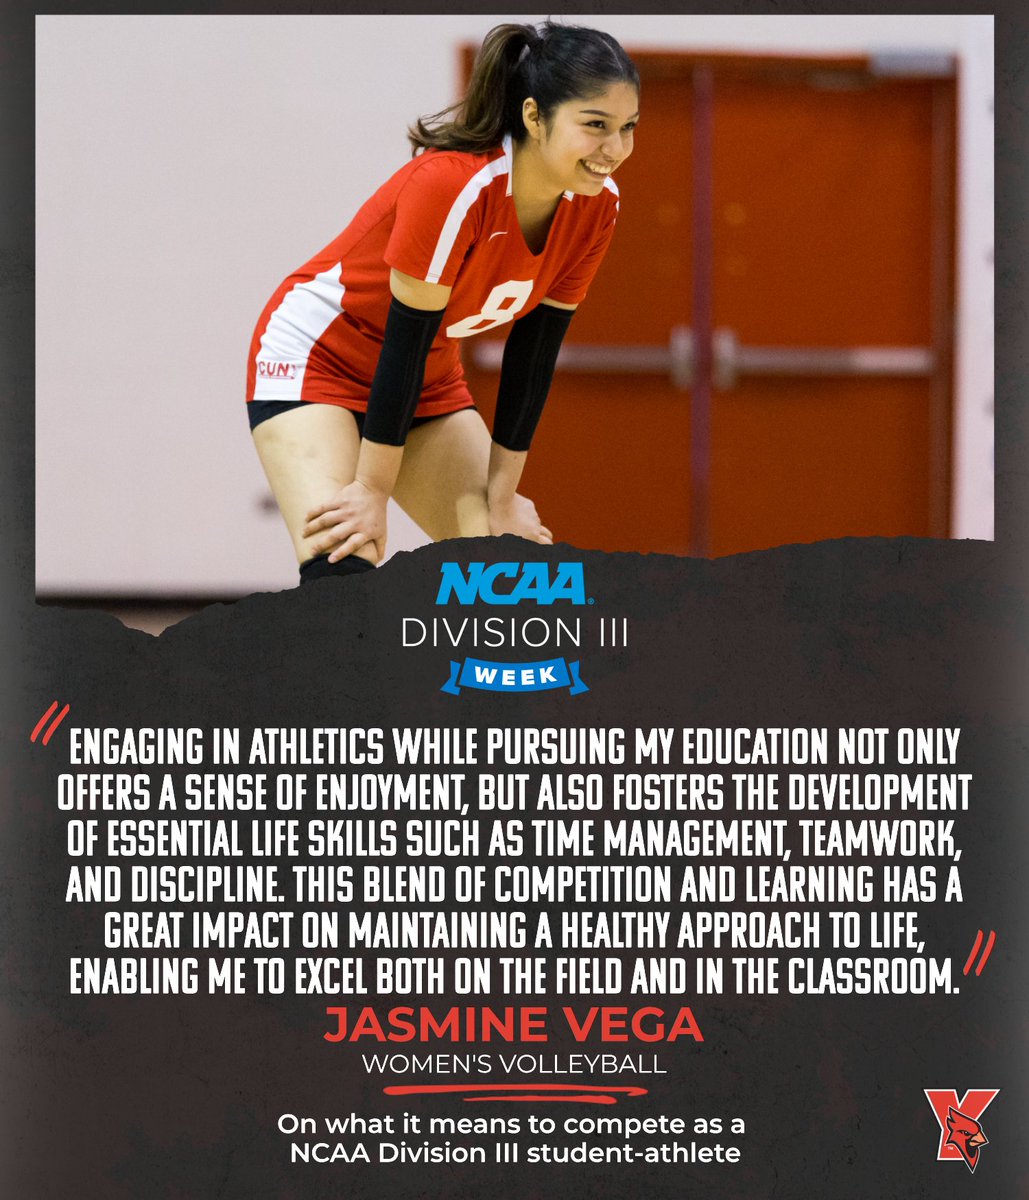 #D3Week features Jasmine Vega of @YorkCollegeCUNY Women's 🏐, who speaks about what it means to compete as an @NCAA @NCAADIII student-athlete 📈

#YCCardinals #RiseAbove #TheCardinalWay #WeAreOneYork #NCAAD3 #whyD3 #myD3